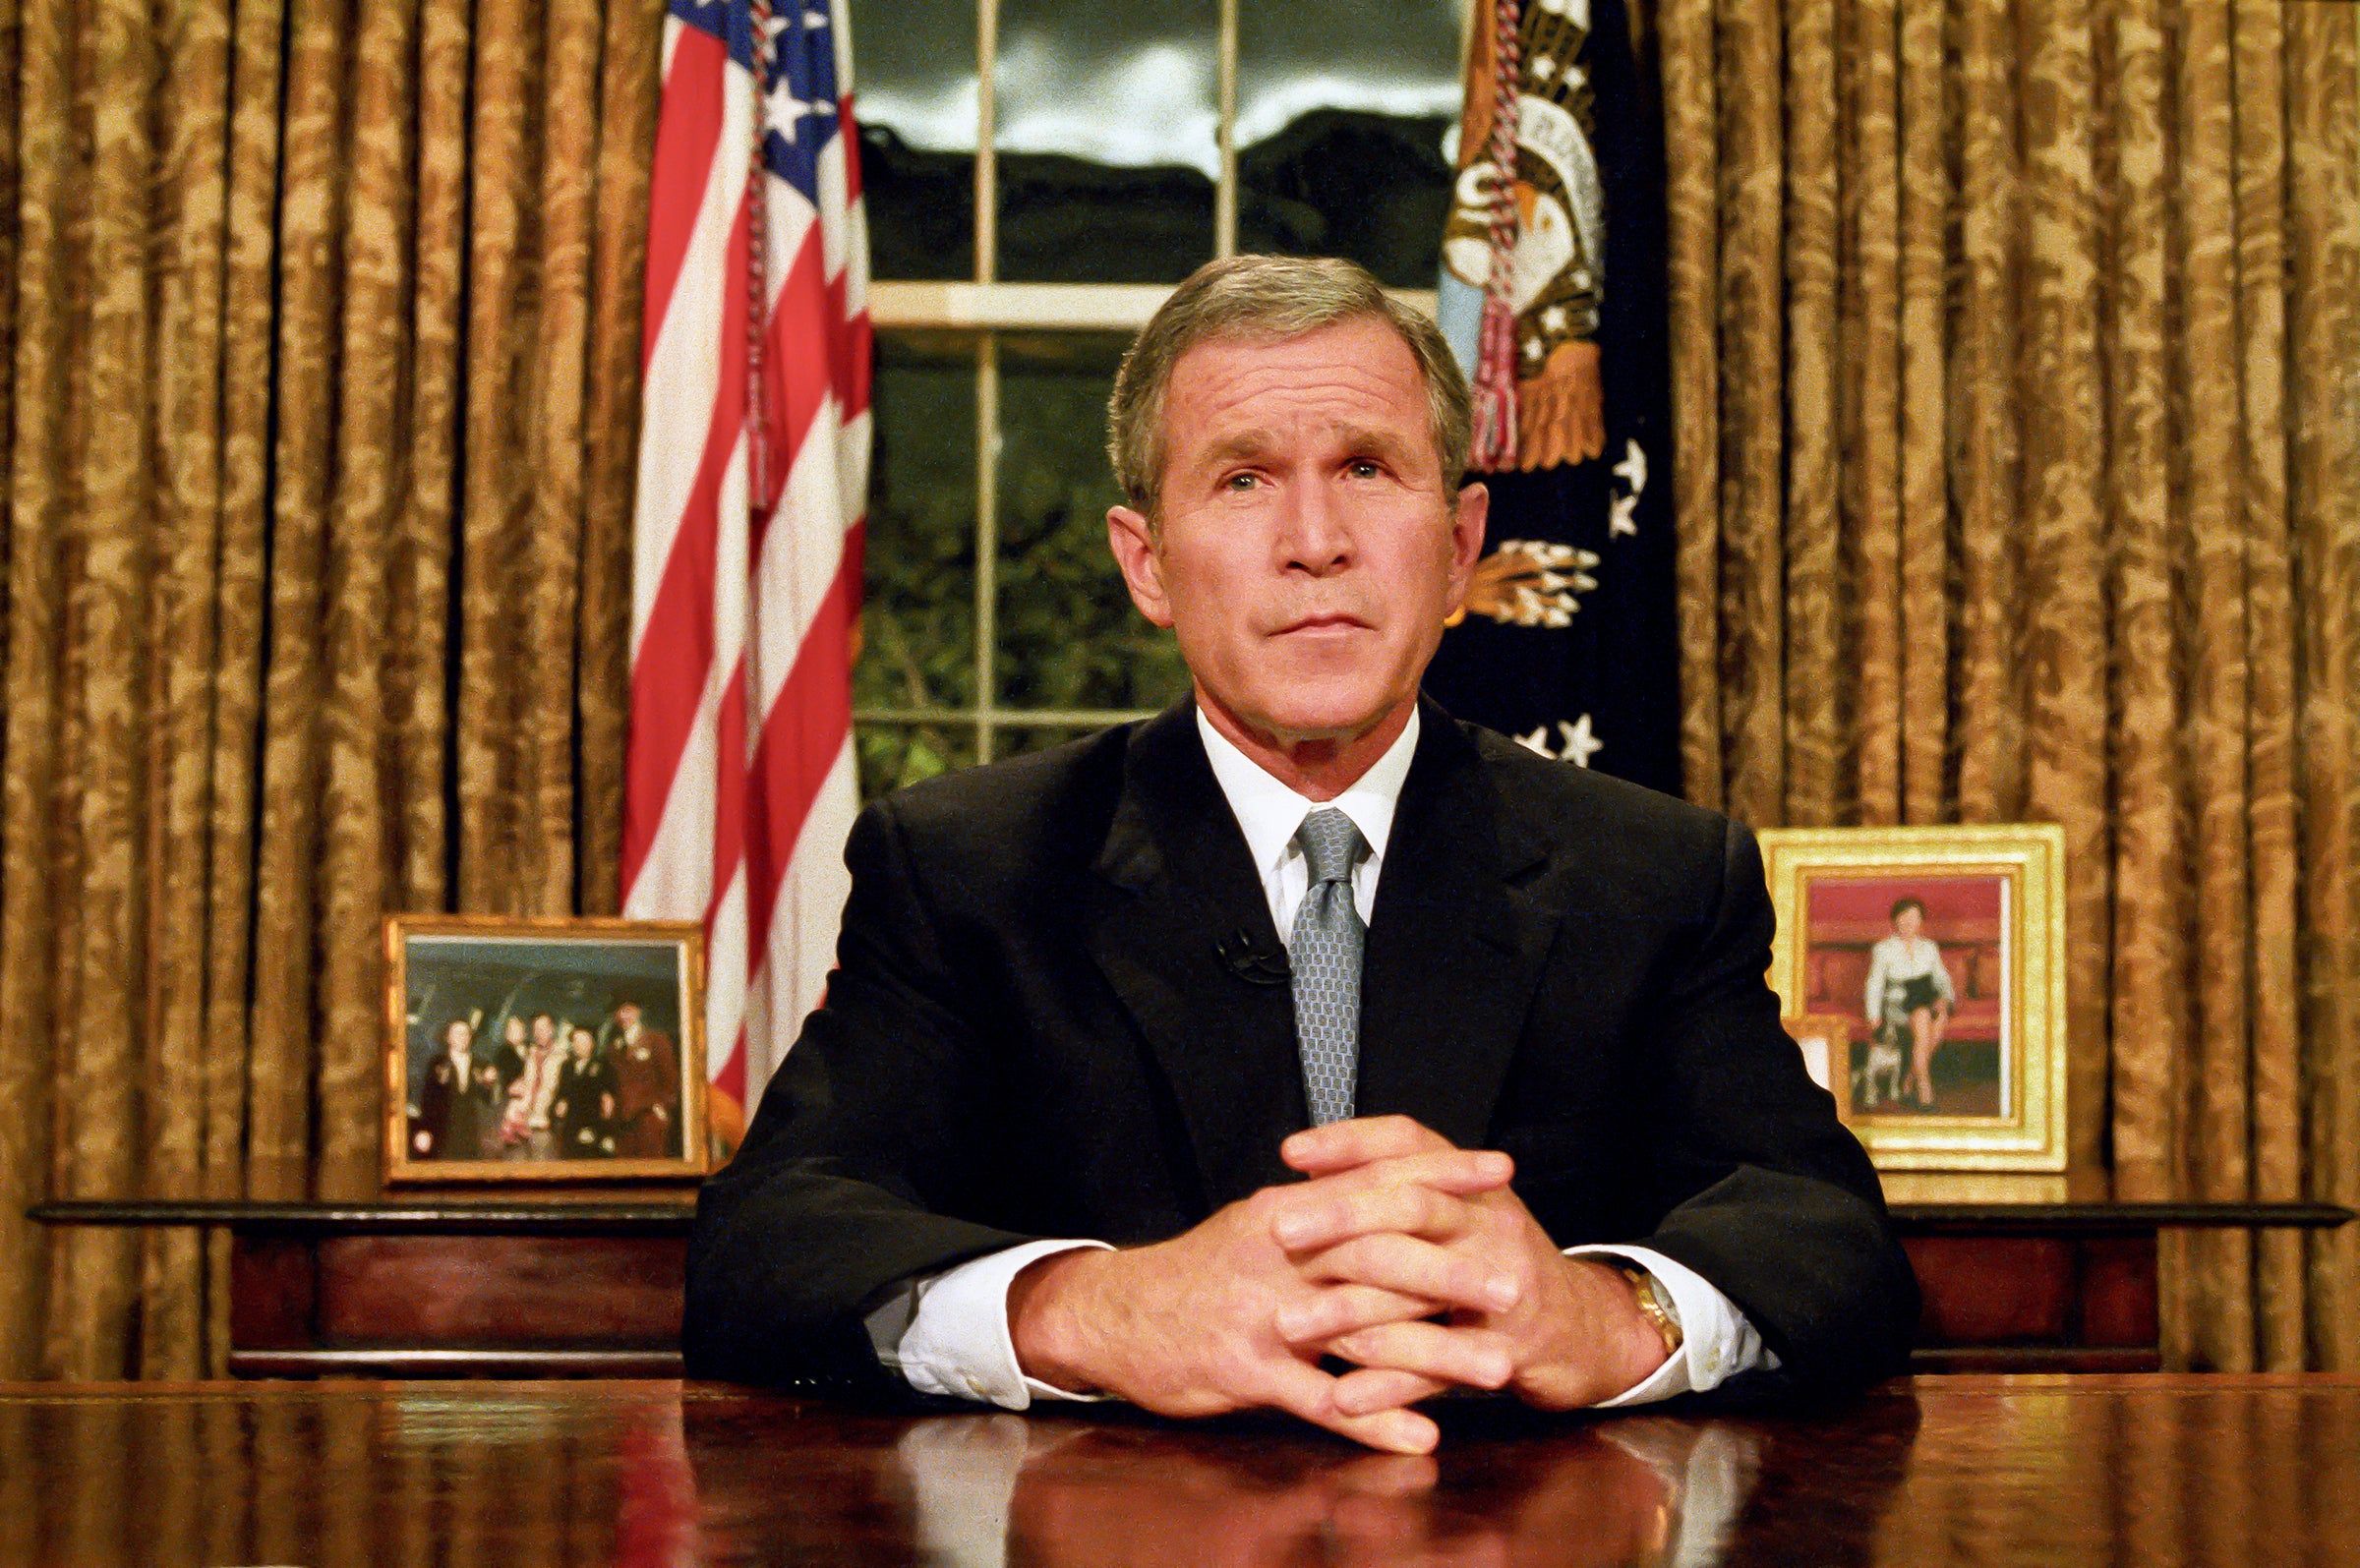 President George W Bush in the Oval Office after the terrorist attacks of 11 September 2001